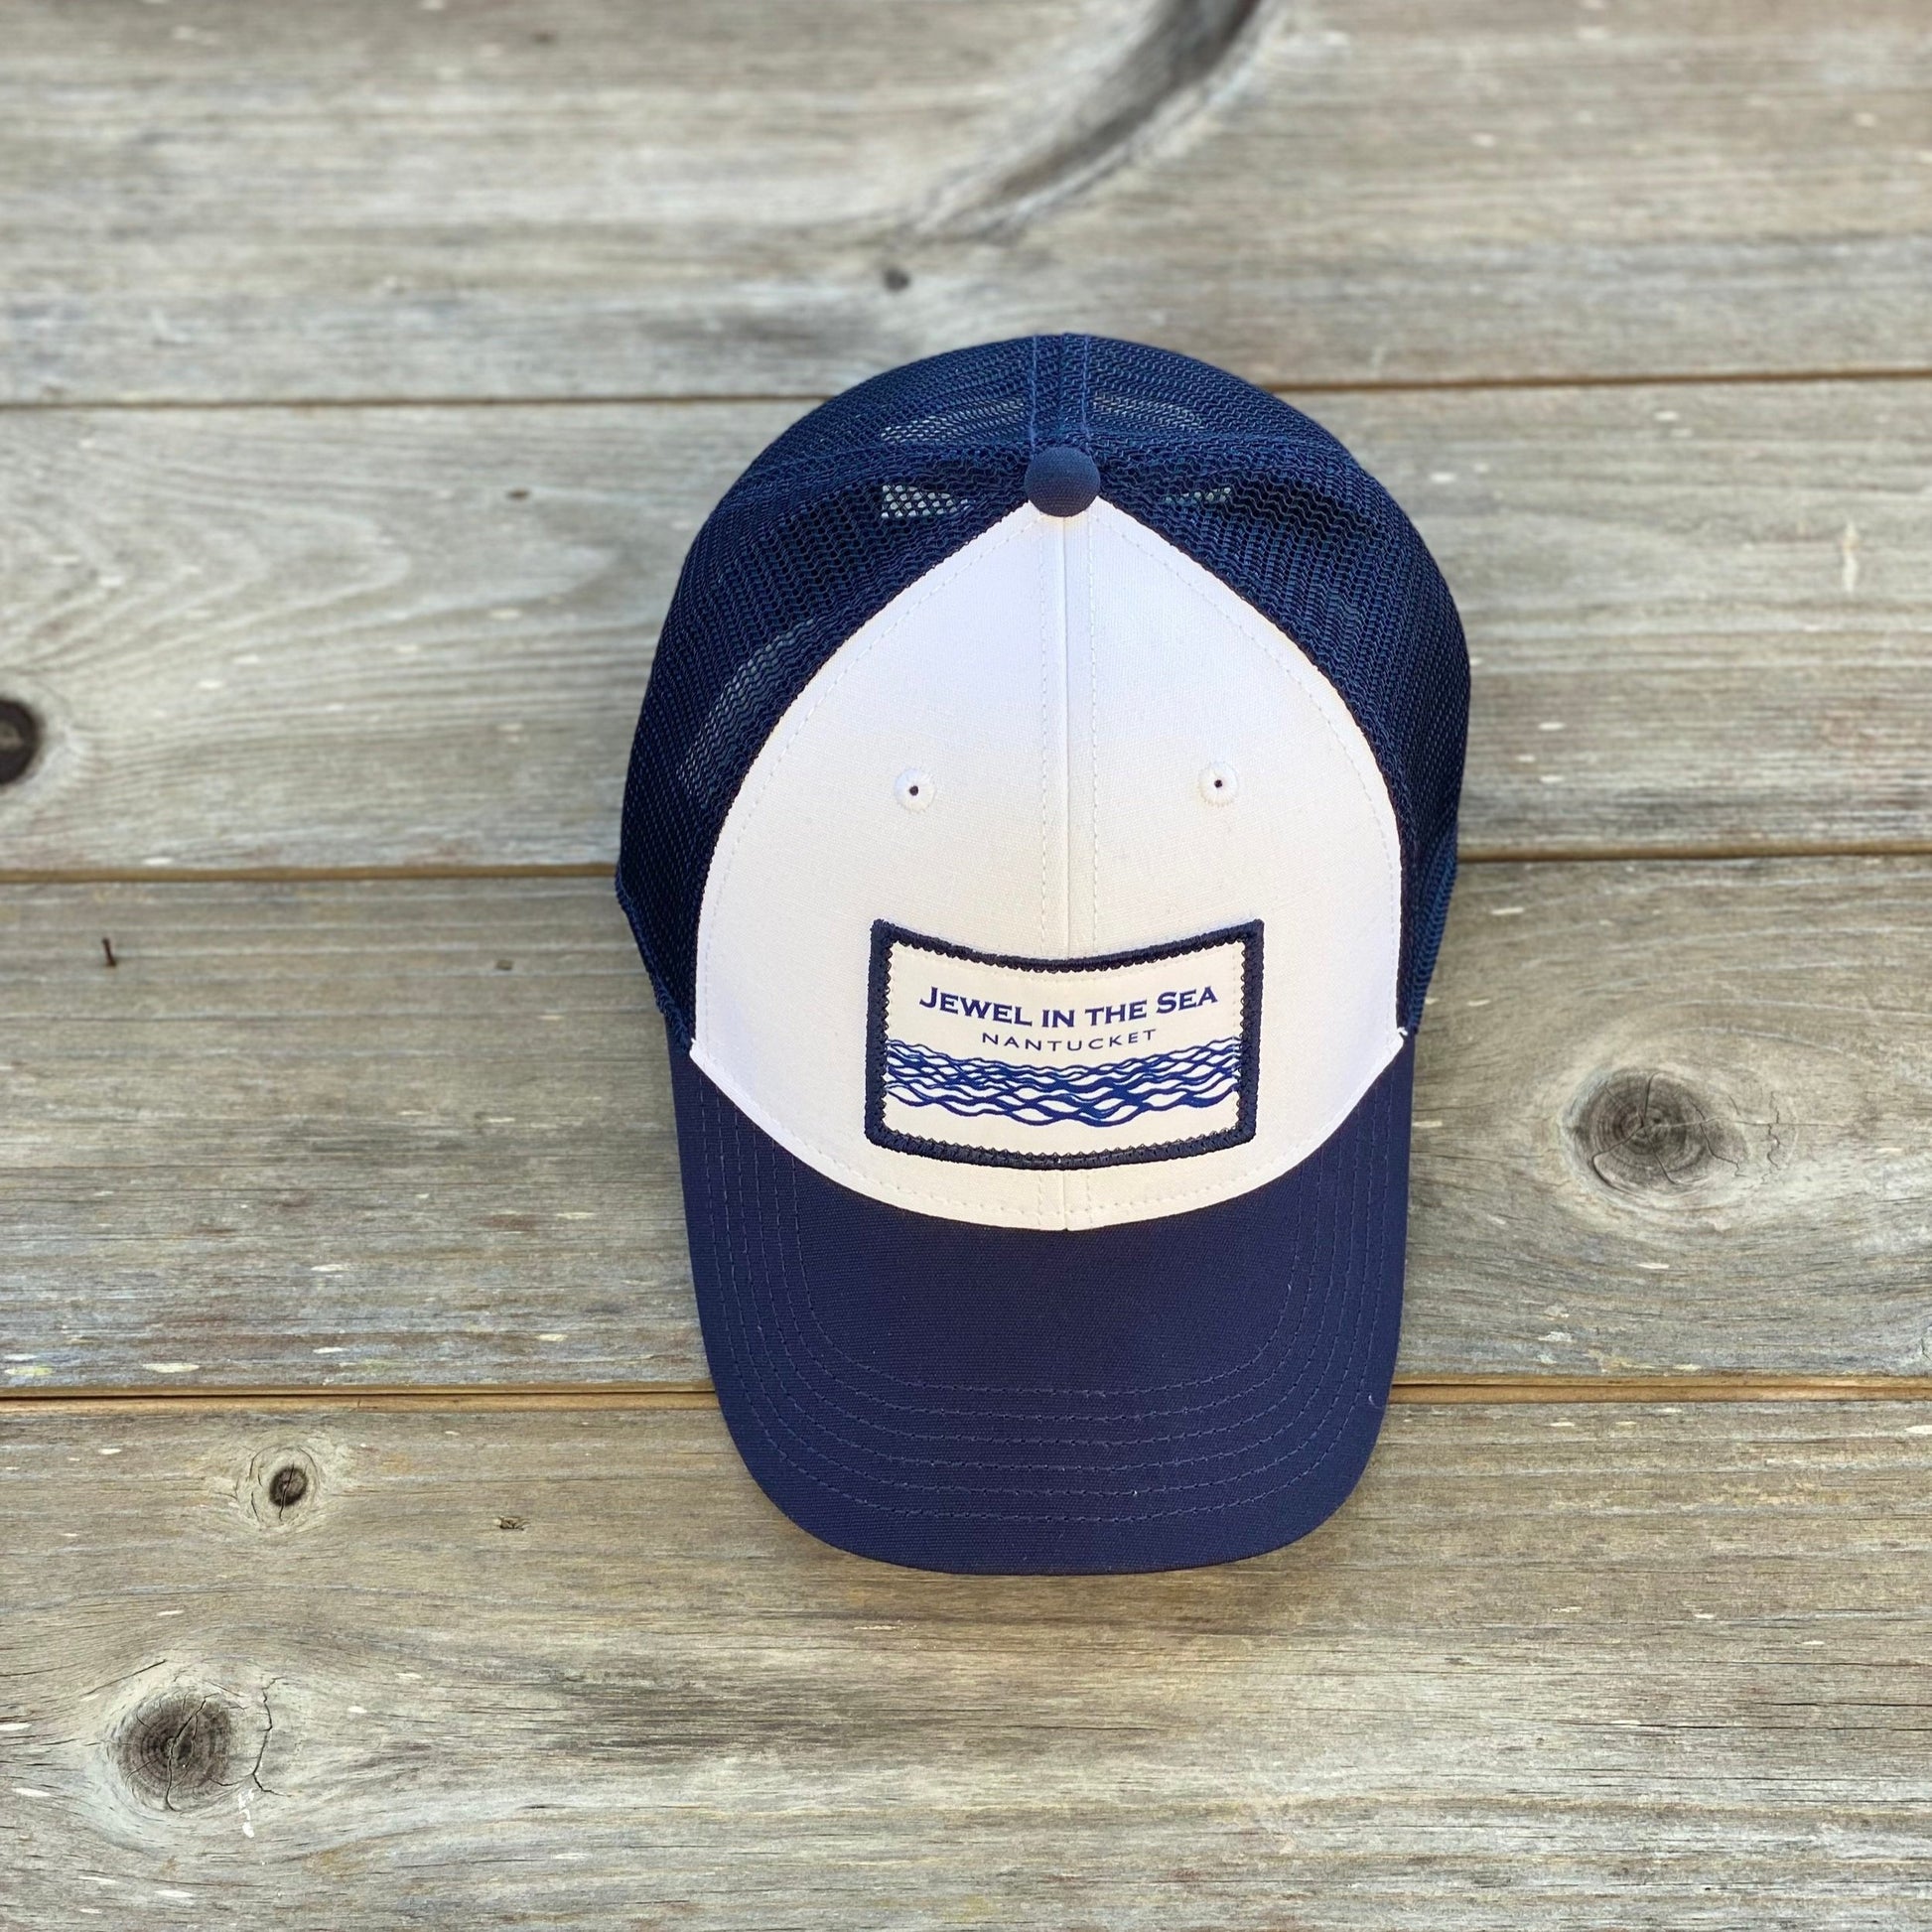 Jewel in the Sea Lo Pro Snapback Trucker Hat in White and Navy